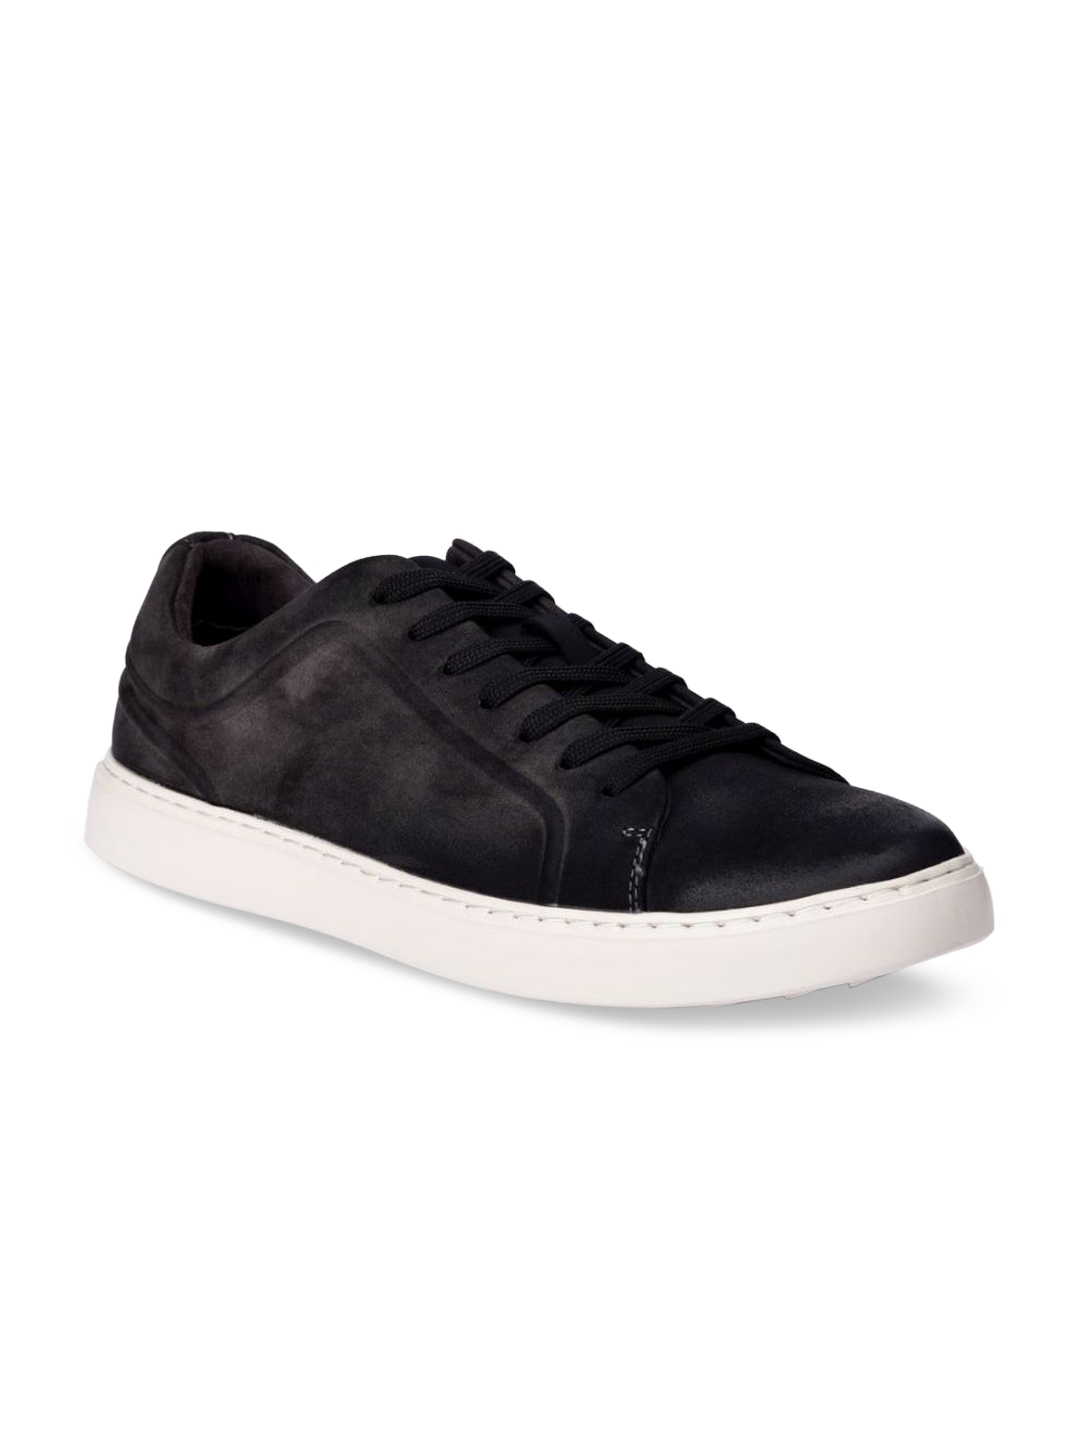 Buy Kenneth Cole Men Charcoal Grey Suede Leather Sneakers - Casual ...